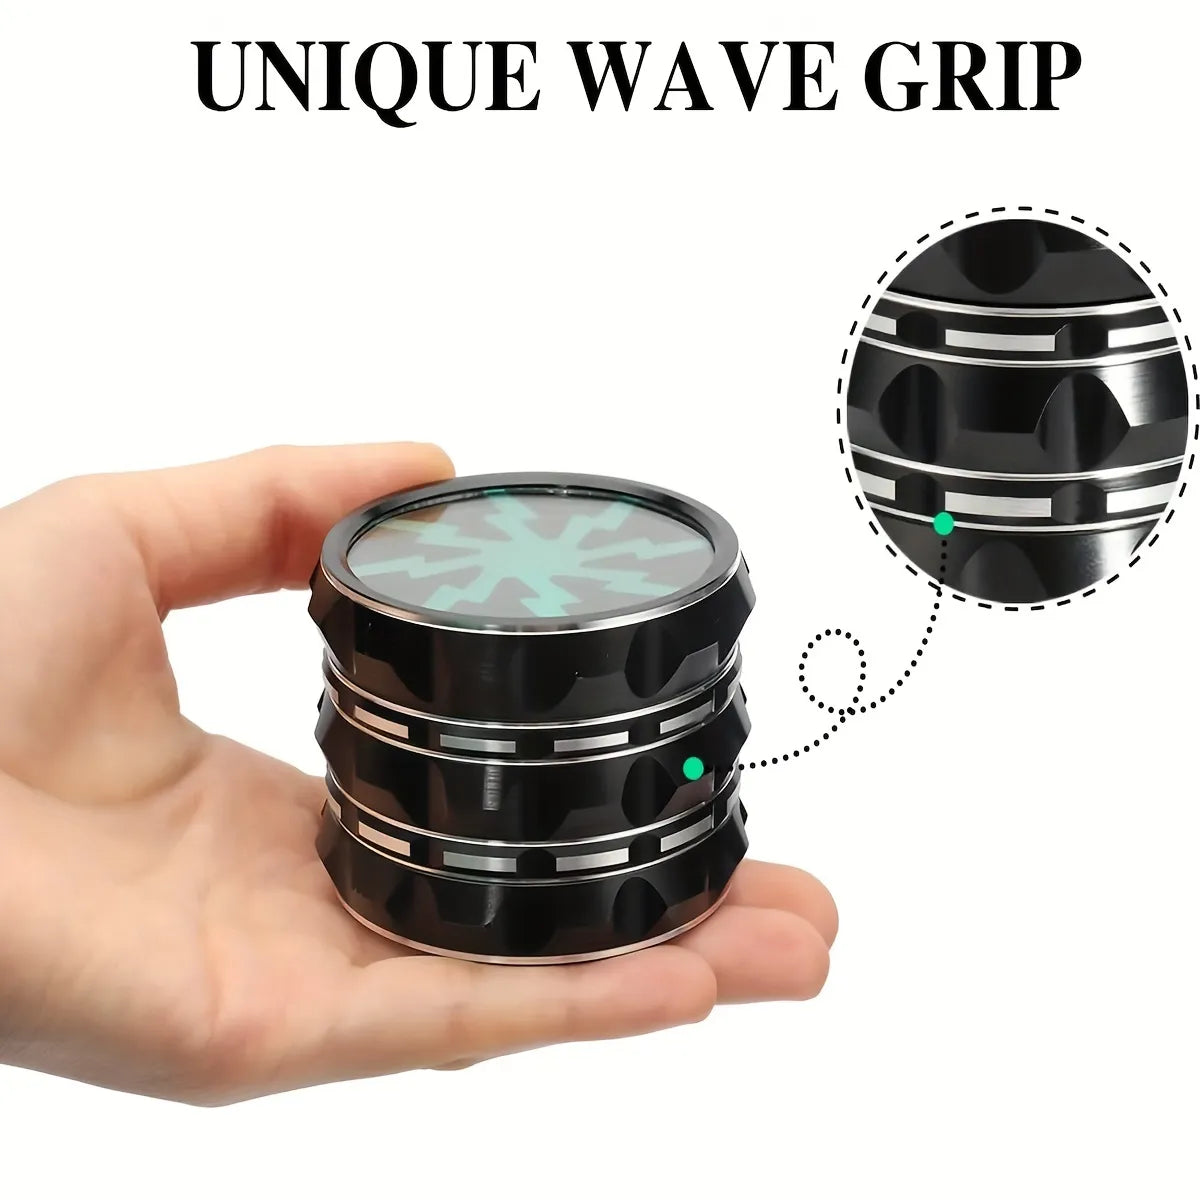 2.5inch,65mm Hand Crank Aluminium Grinder with Clear Top, Black and Green, Best Gift